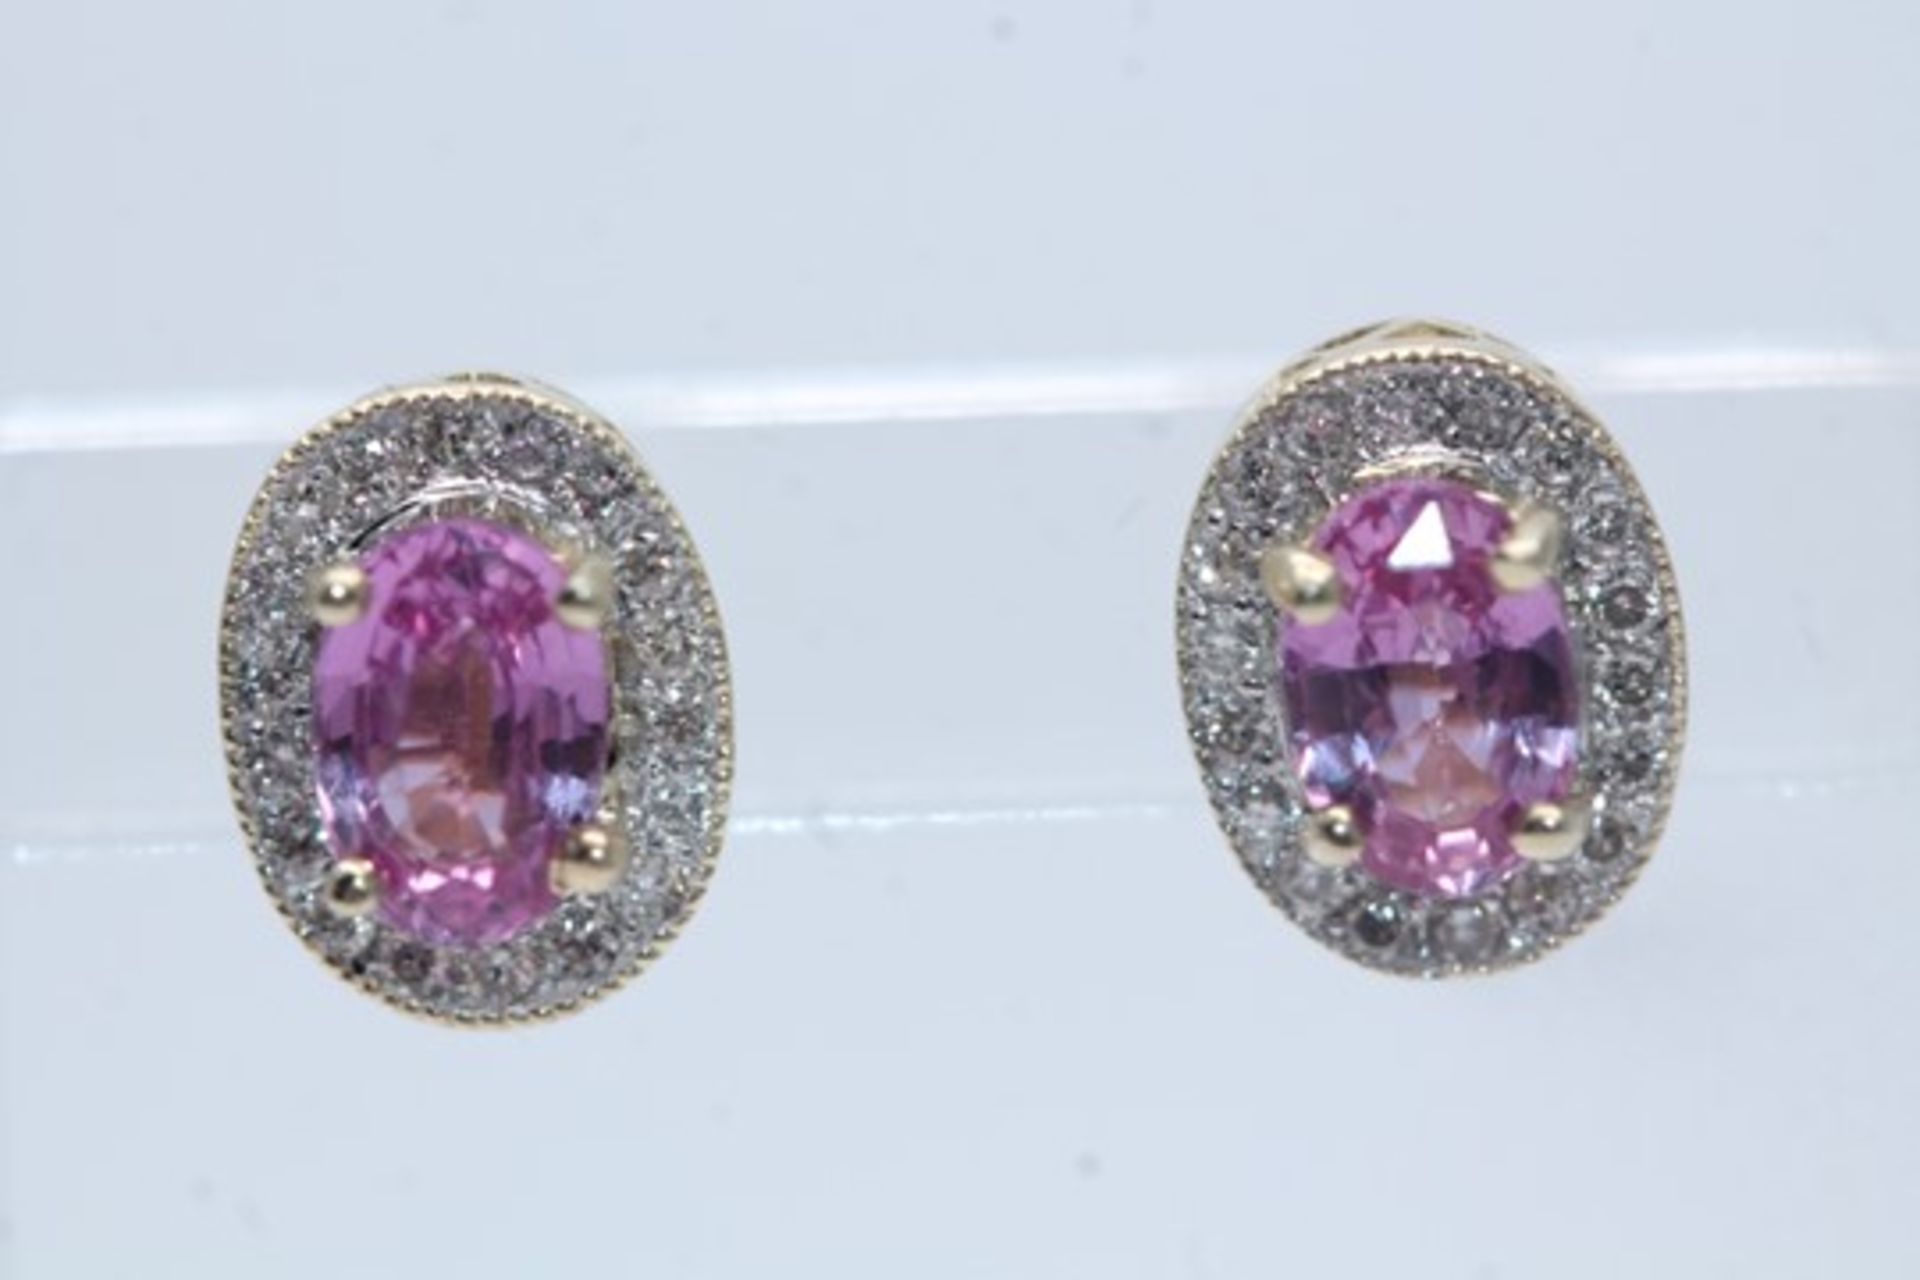 9ct Yellow Gold, Natural Pink Sapphire And Diamond Earrings, Includes AGI Insurance Certificate - Image 2 of 3